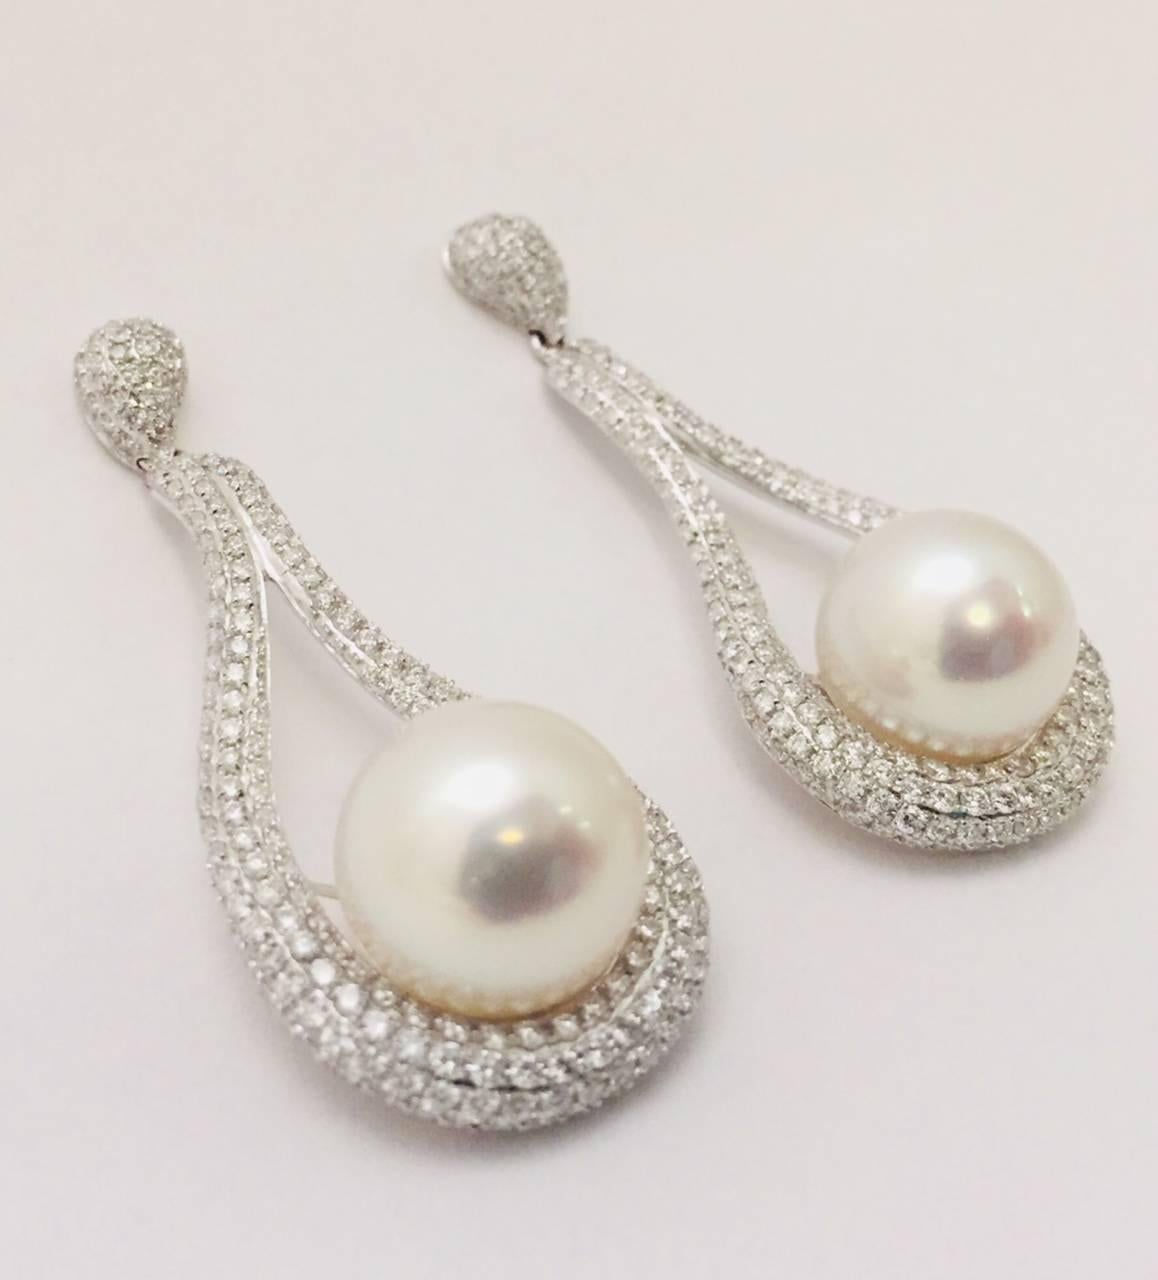 Gorgeous freeform drop earrings dazzle and mesmerize!  Crafted from 18K White gold, white pave-set diamonds and seductive 12mm South Sea pearls, these will quickly become a favored pair of pearls!  Perfect for special events, the upcoming holidays